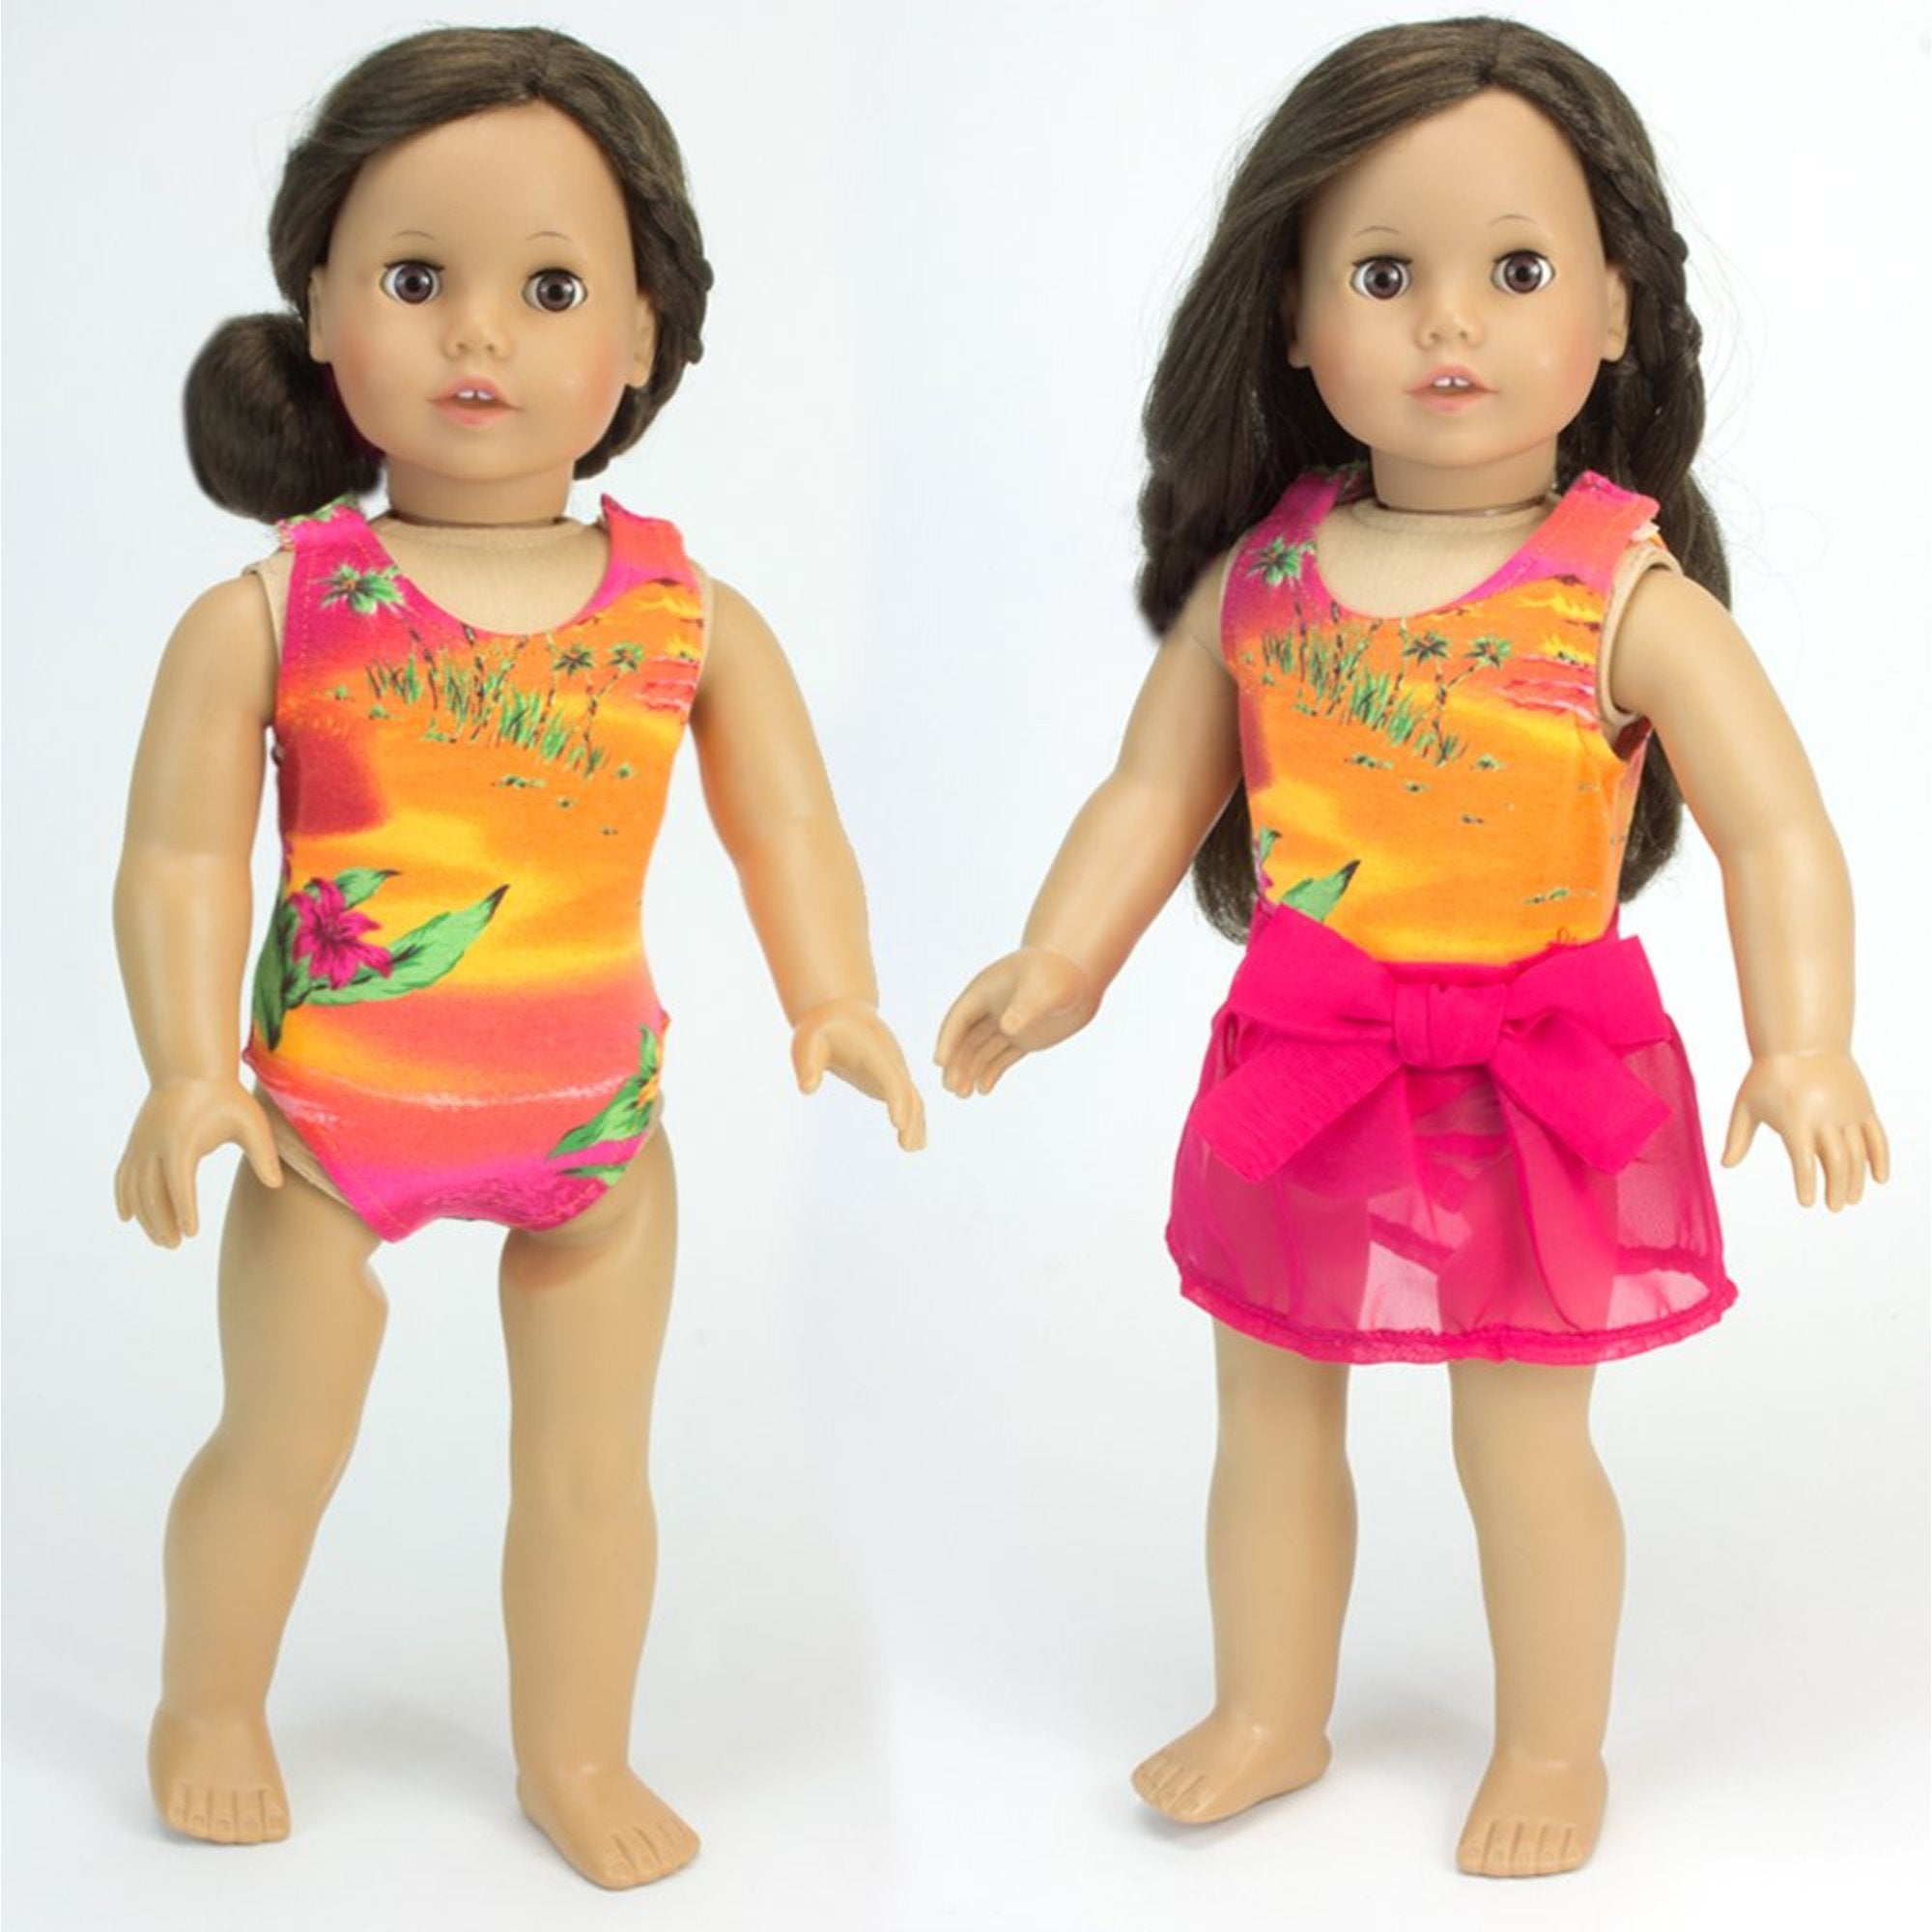 Sophia’s Seasonal One-Piece Sunset Design Bathing Suit & Sarong Cover-Up Skirt Summer Fun Outfit Set for 18” Dolls, Orange/Hot Pink